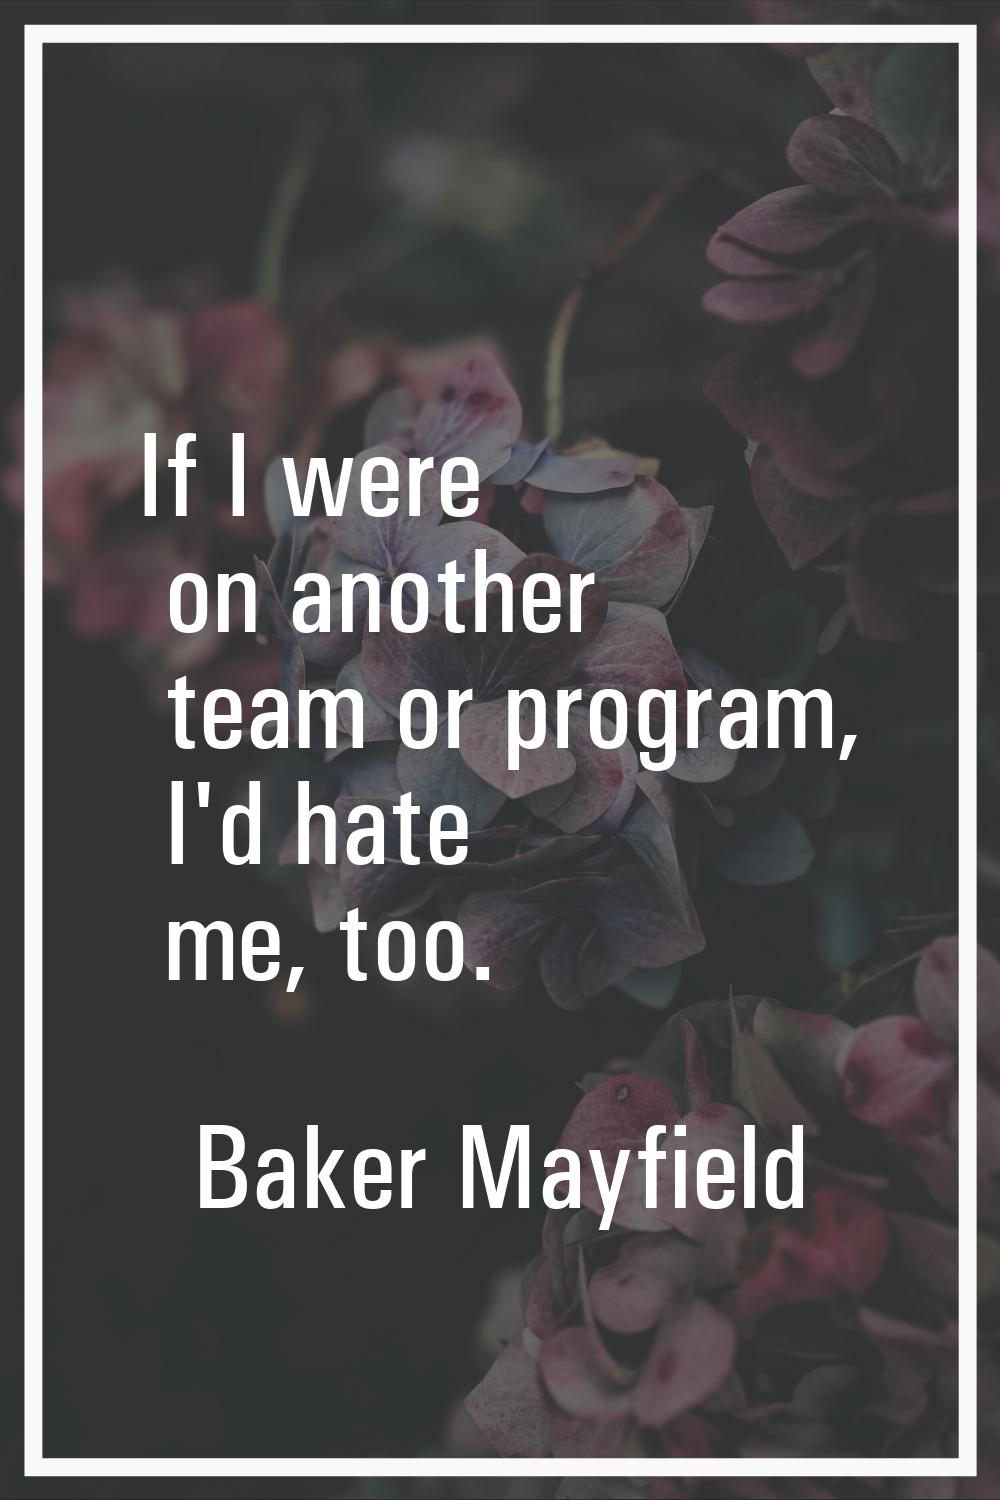 If I were on another team or program, I'd hate me, too.